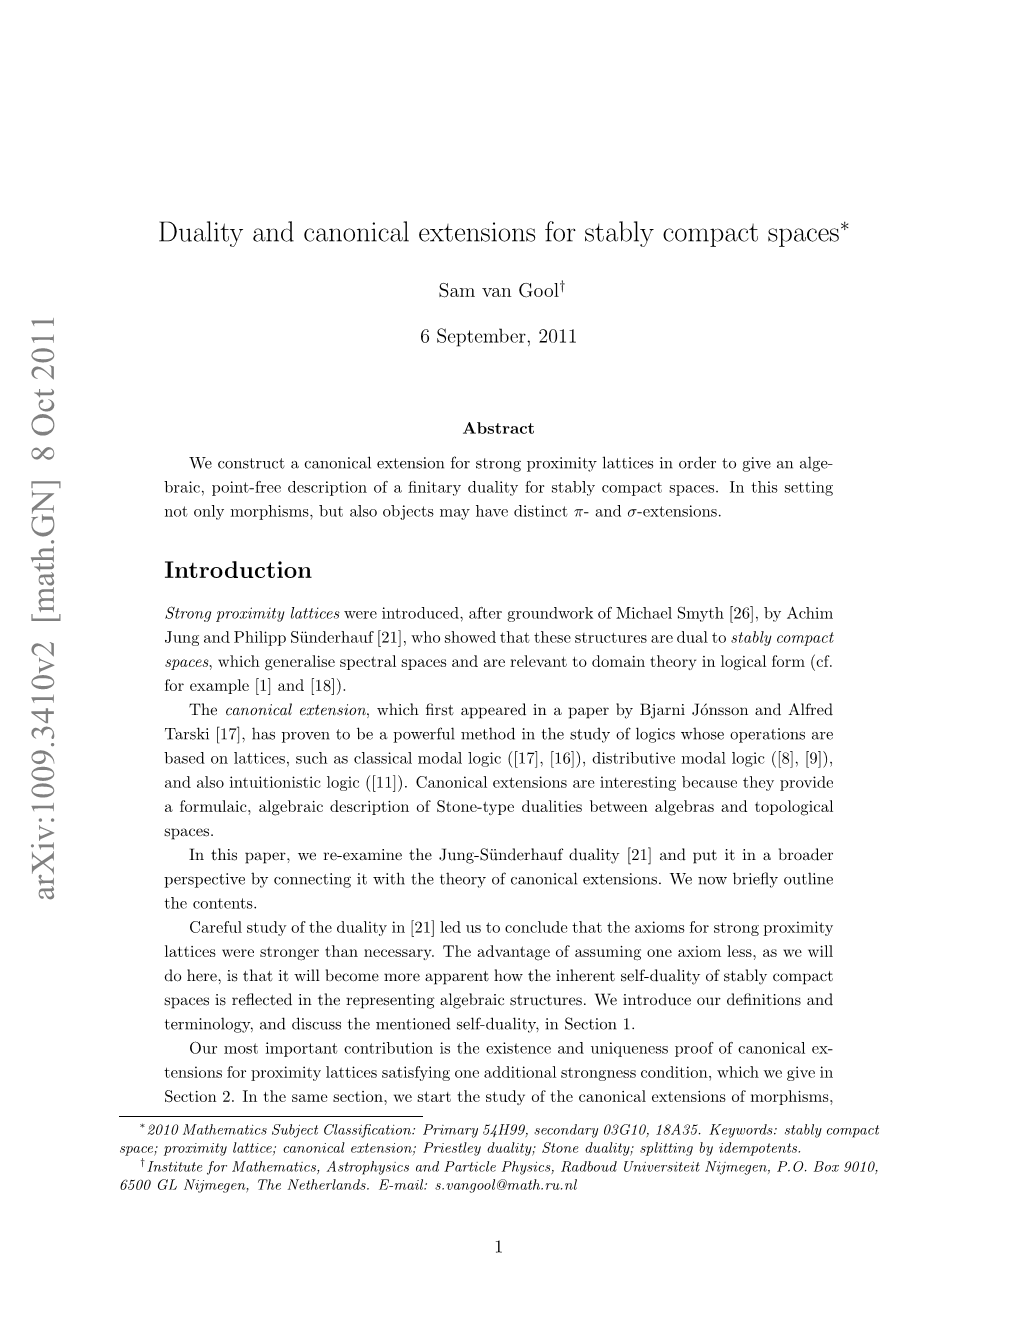 Duality and Canonical Extensions for Stably Compact Spaces